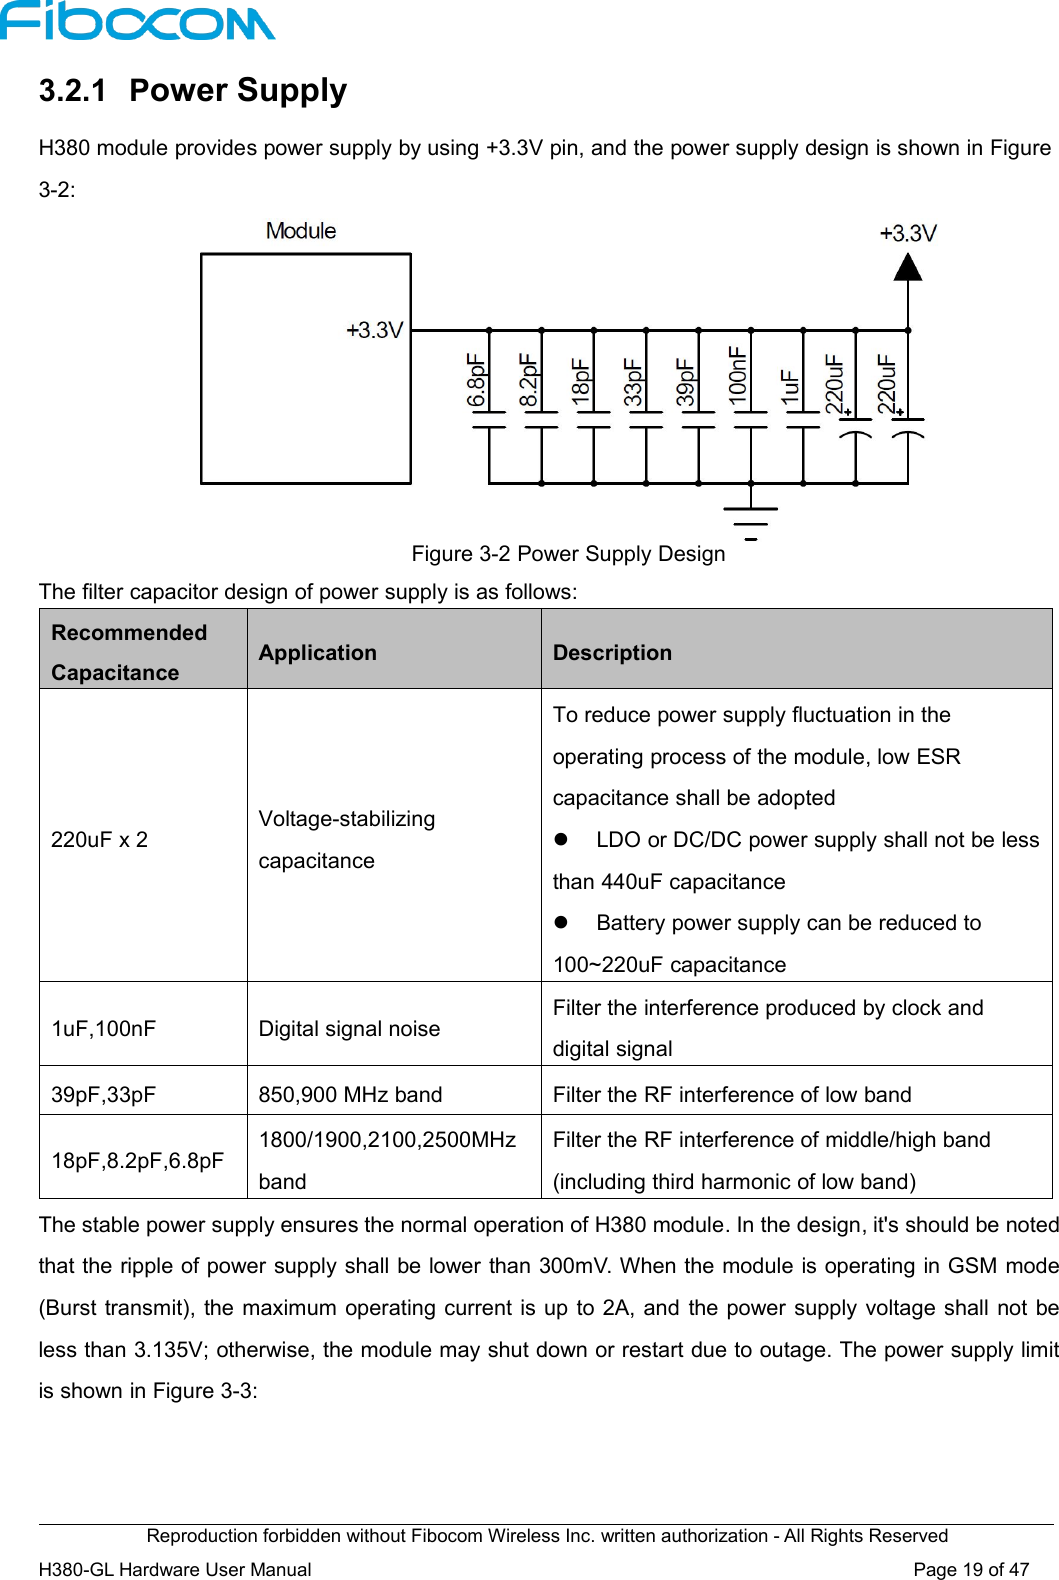 Reproduction forbidden without Fibocom Wireless Inc. written authorization - All Rights ReservedH380-GL Hardware User Manual Page19of473.2.1 Power SupplyH380 module provides power supply by using +3.3V pin, and the power supply design is shown in Figure3-2:Figure 3-2 Power Supply DesignThe filter capacitor design of power supply is as follows:RecommendedCapacitanceApplicationDescription220uF x 2Voltage-stabilizingcapacitanceTo reduce power supply fluctuation in theoperating process of the module, low ESRcapacitance shall be adoptedLDO or DC/DC power supply shall not be lessthan 440uF capacitanceBattery power supply can be reduced to100~220uF capacitance1uF,100nFDigital signal noiseFilter the interference produced by clock anddigital signal39pF,33pF850,900 MHz bandFilter the RF interference of low band18pF,8.2pF,6.8pF1800/1900,2100,2500MHzbandFilter the RF interference of middle/high band(including third harmonic of low band)The stable power supply ensures the normal operation of H380 module. In the design, it&apos;s should be notedthat the ripple of power supply shall be lower than 300mV. When the module is operating in GSM mode(Burst transmit), the maximum operating current is up to 2A, and the power supply voltage shall not beless than 3.135V; otherwise, the module may shut down or restart due to outage. The power supply limitis shown in Figure 3-3: